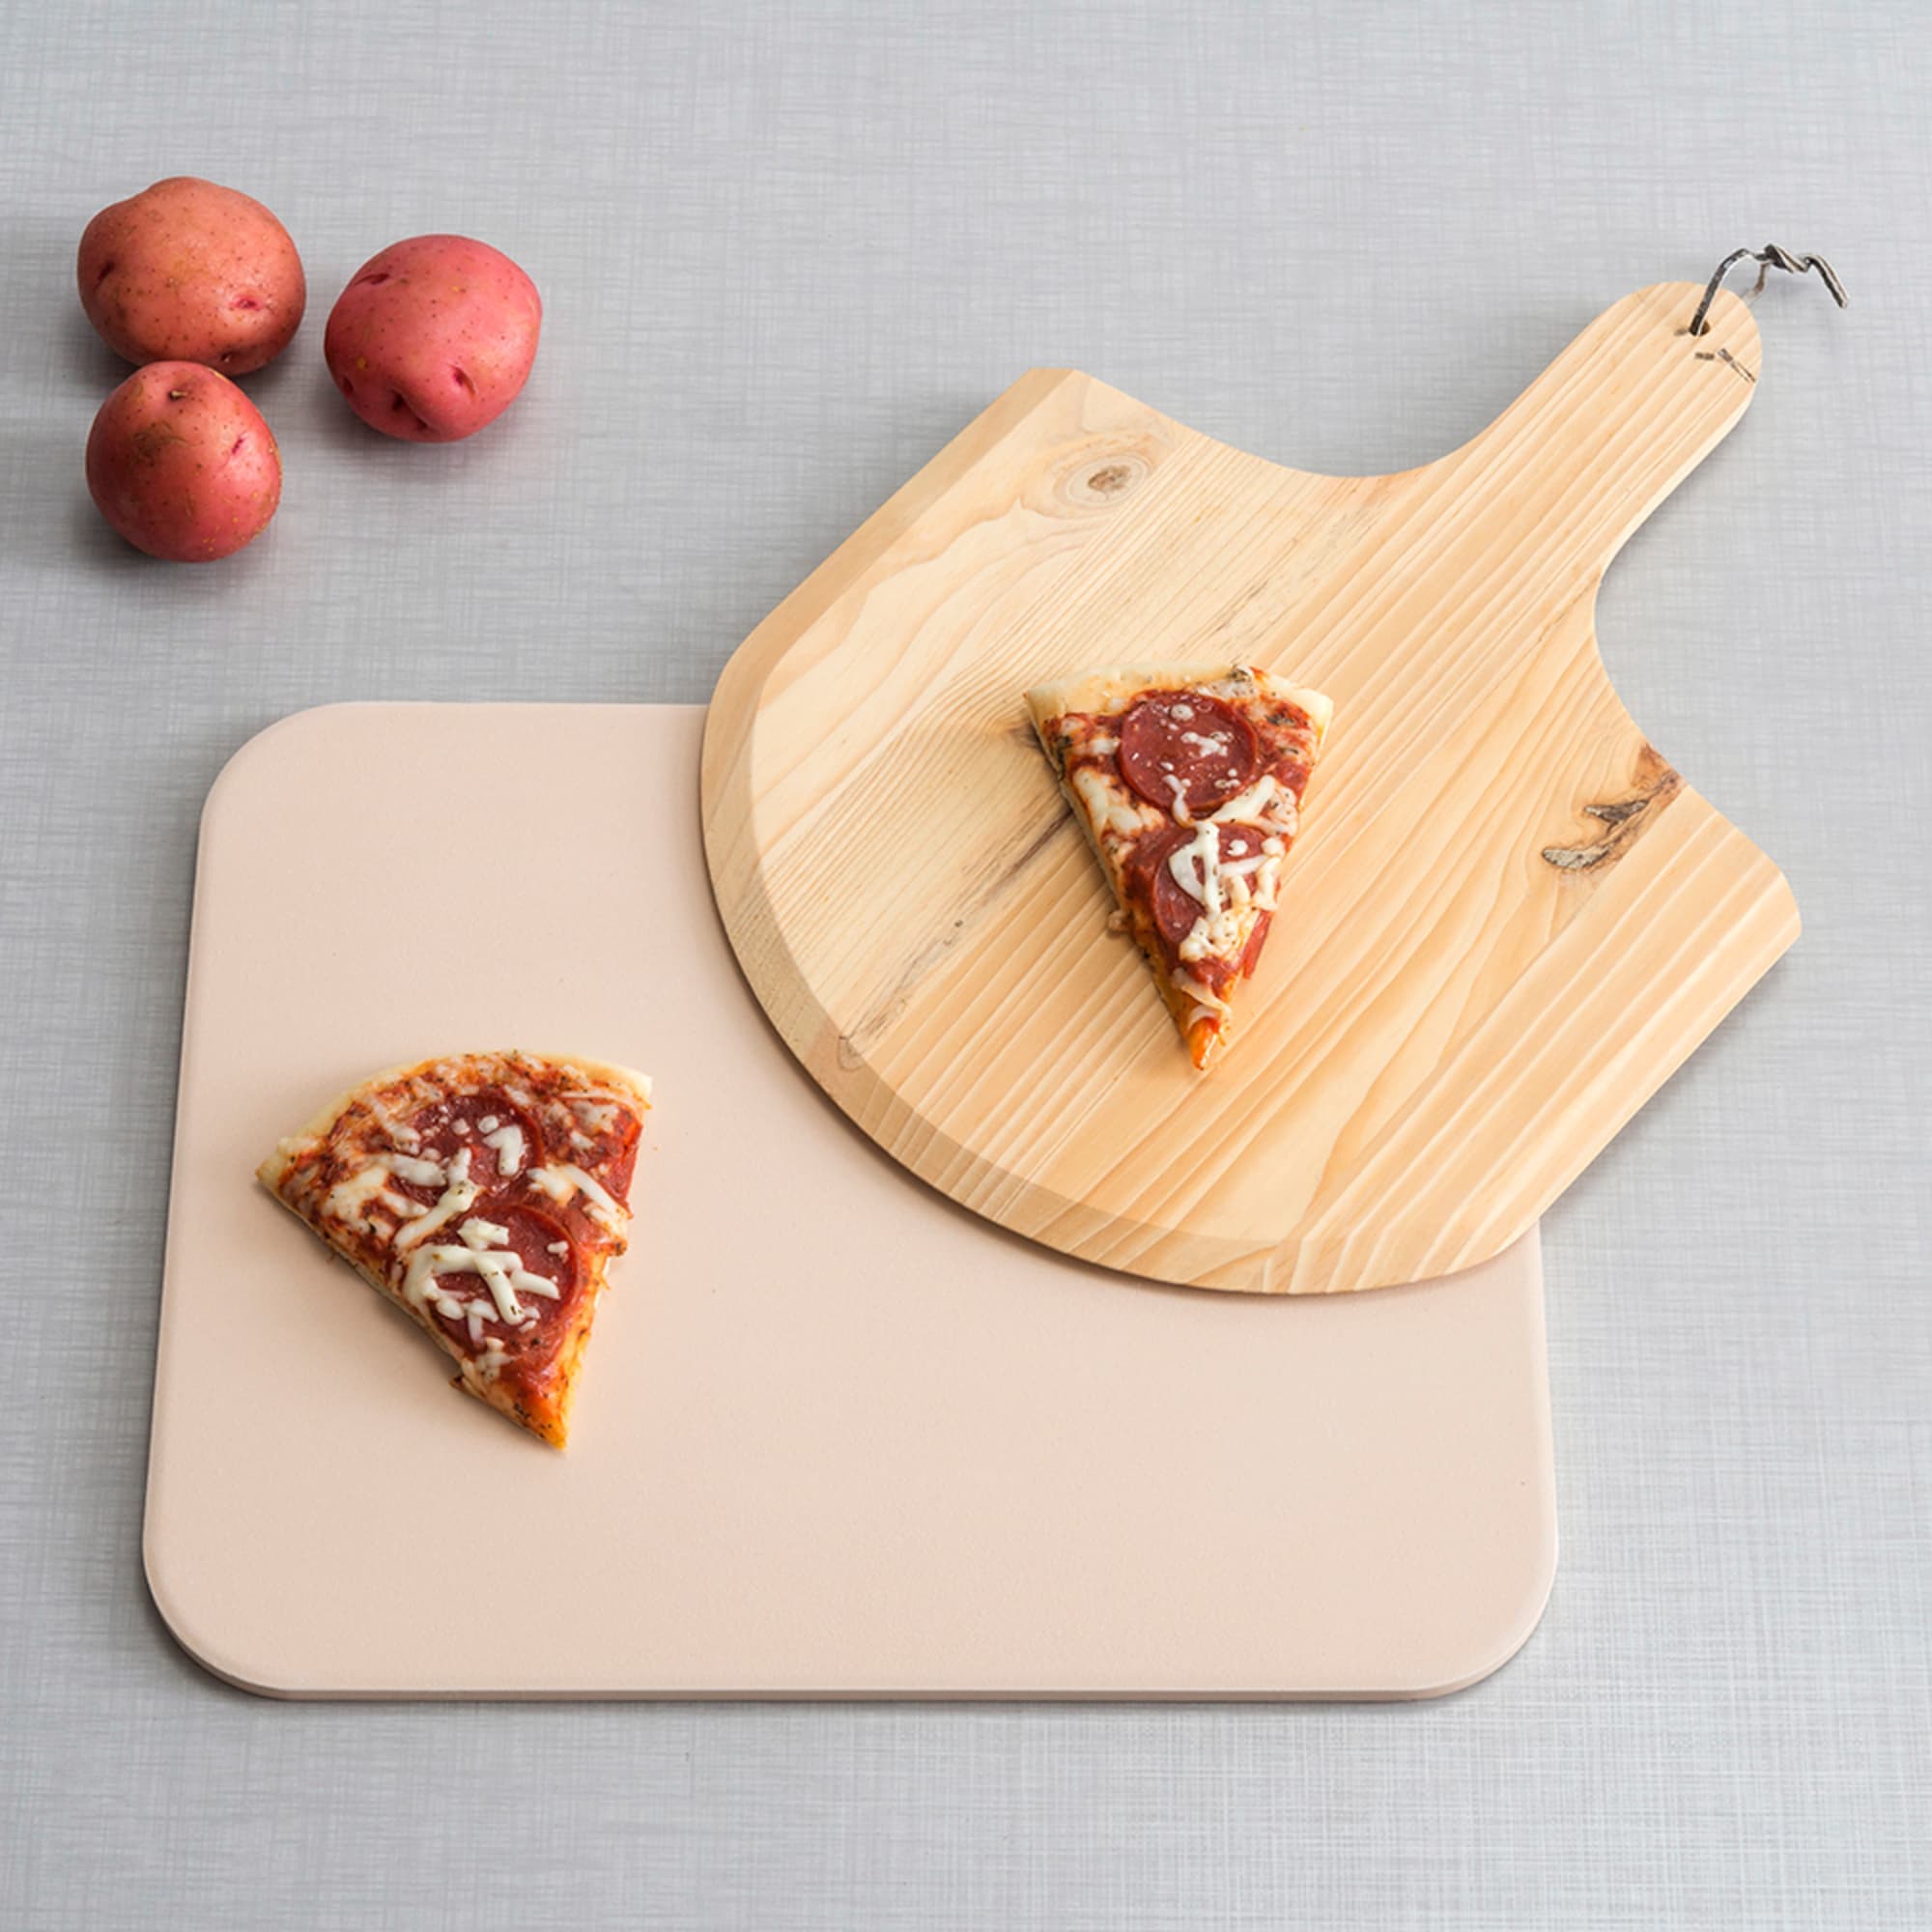 Home Basics Ceramic Pizza Stone with Wood Paddle, White $15.00 EACH, CASE PACK OF 6